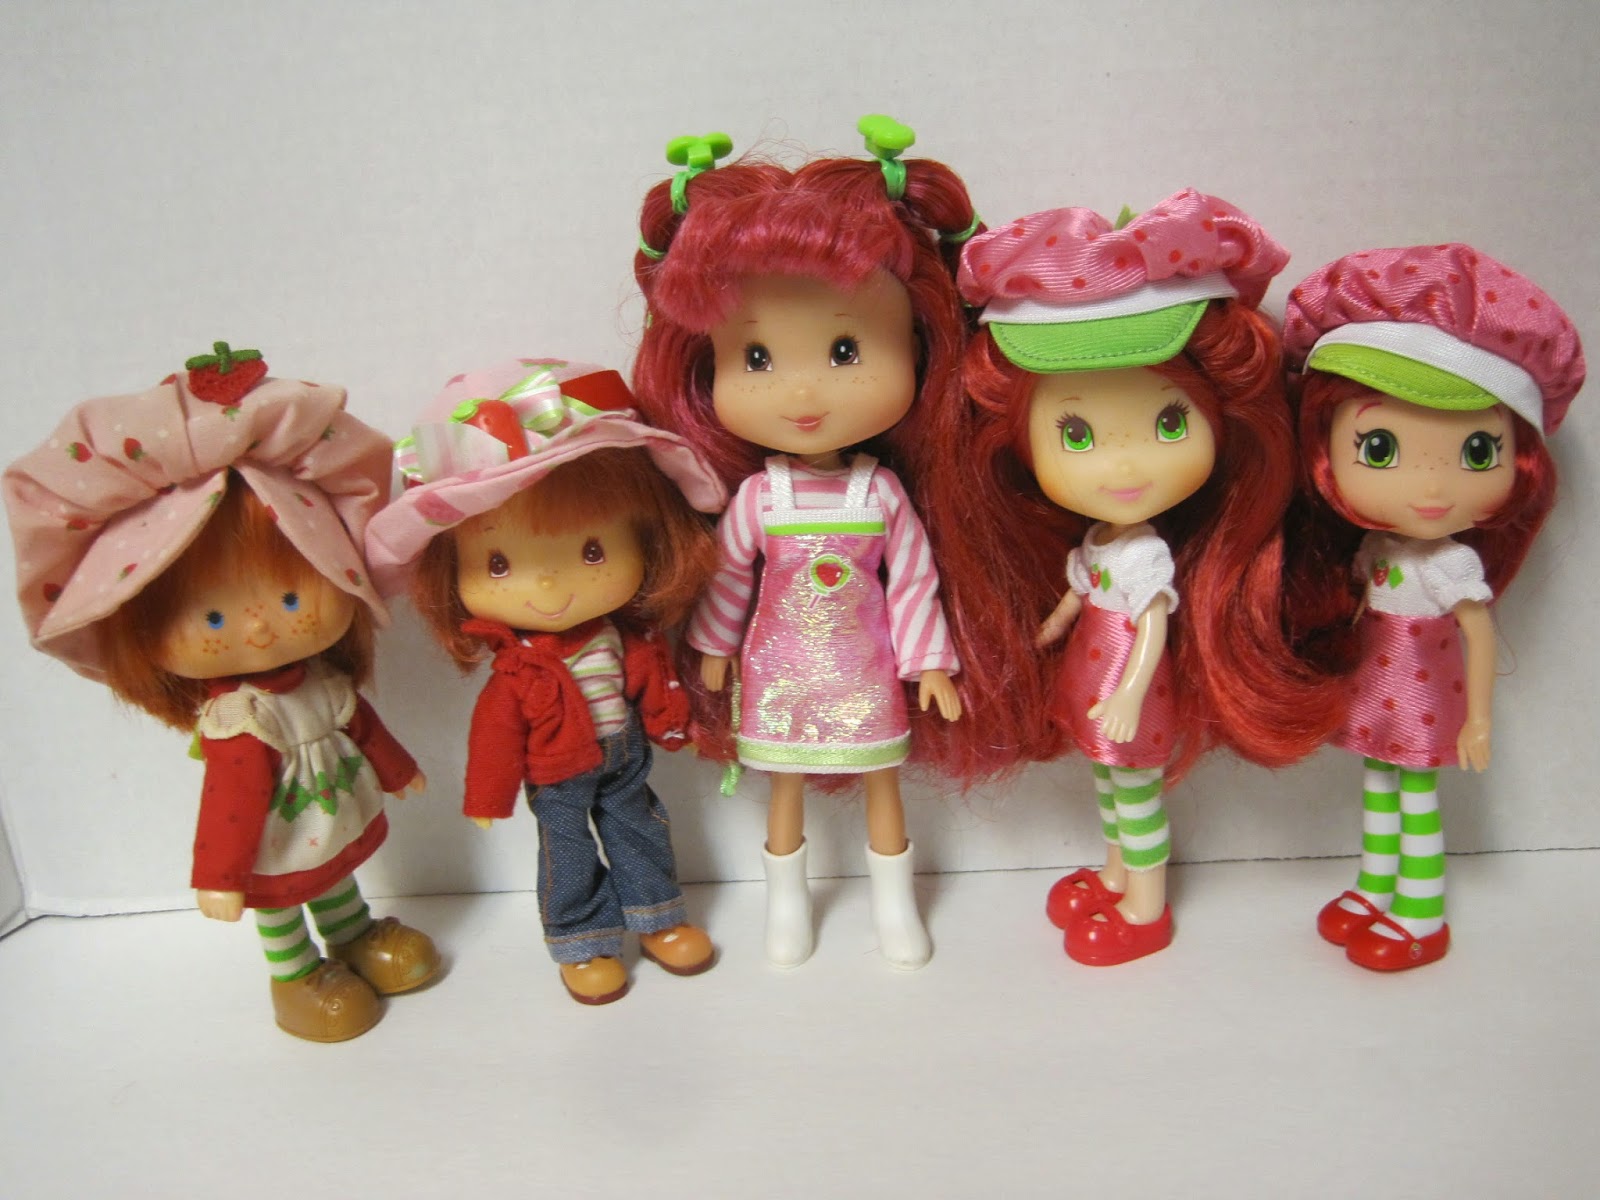 Collectable handmade strawberry shortcake dolls" famous brand.